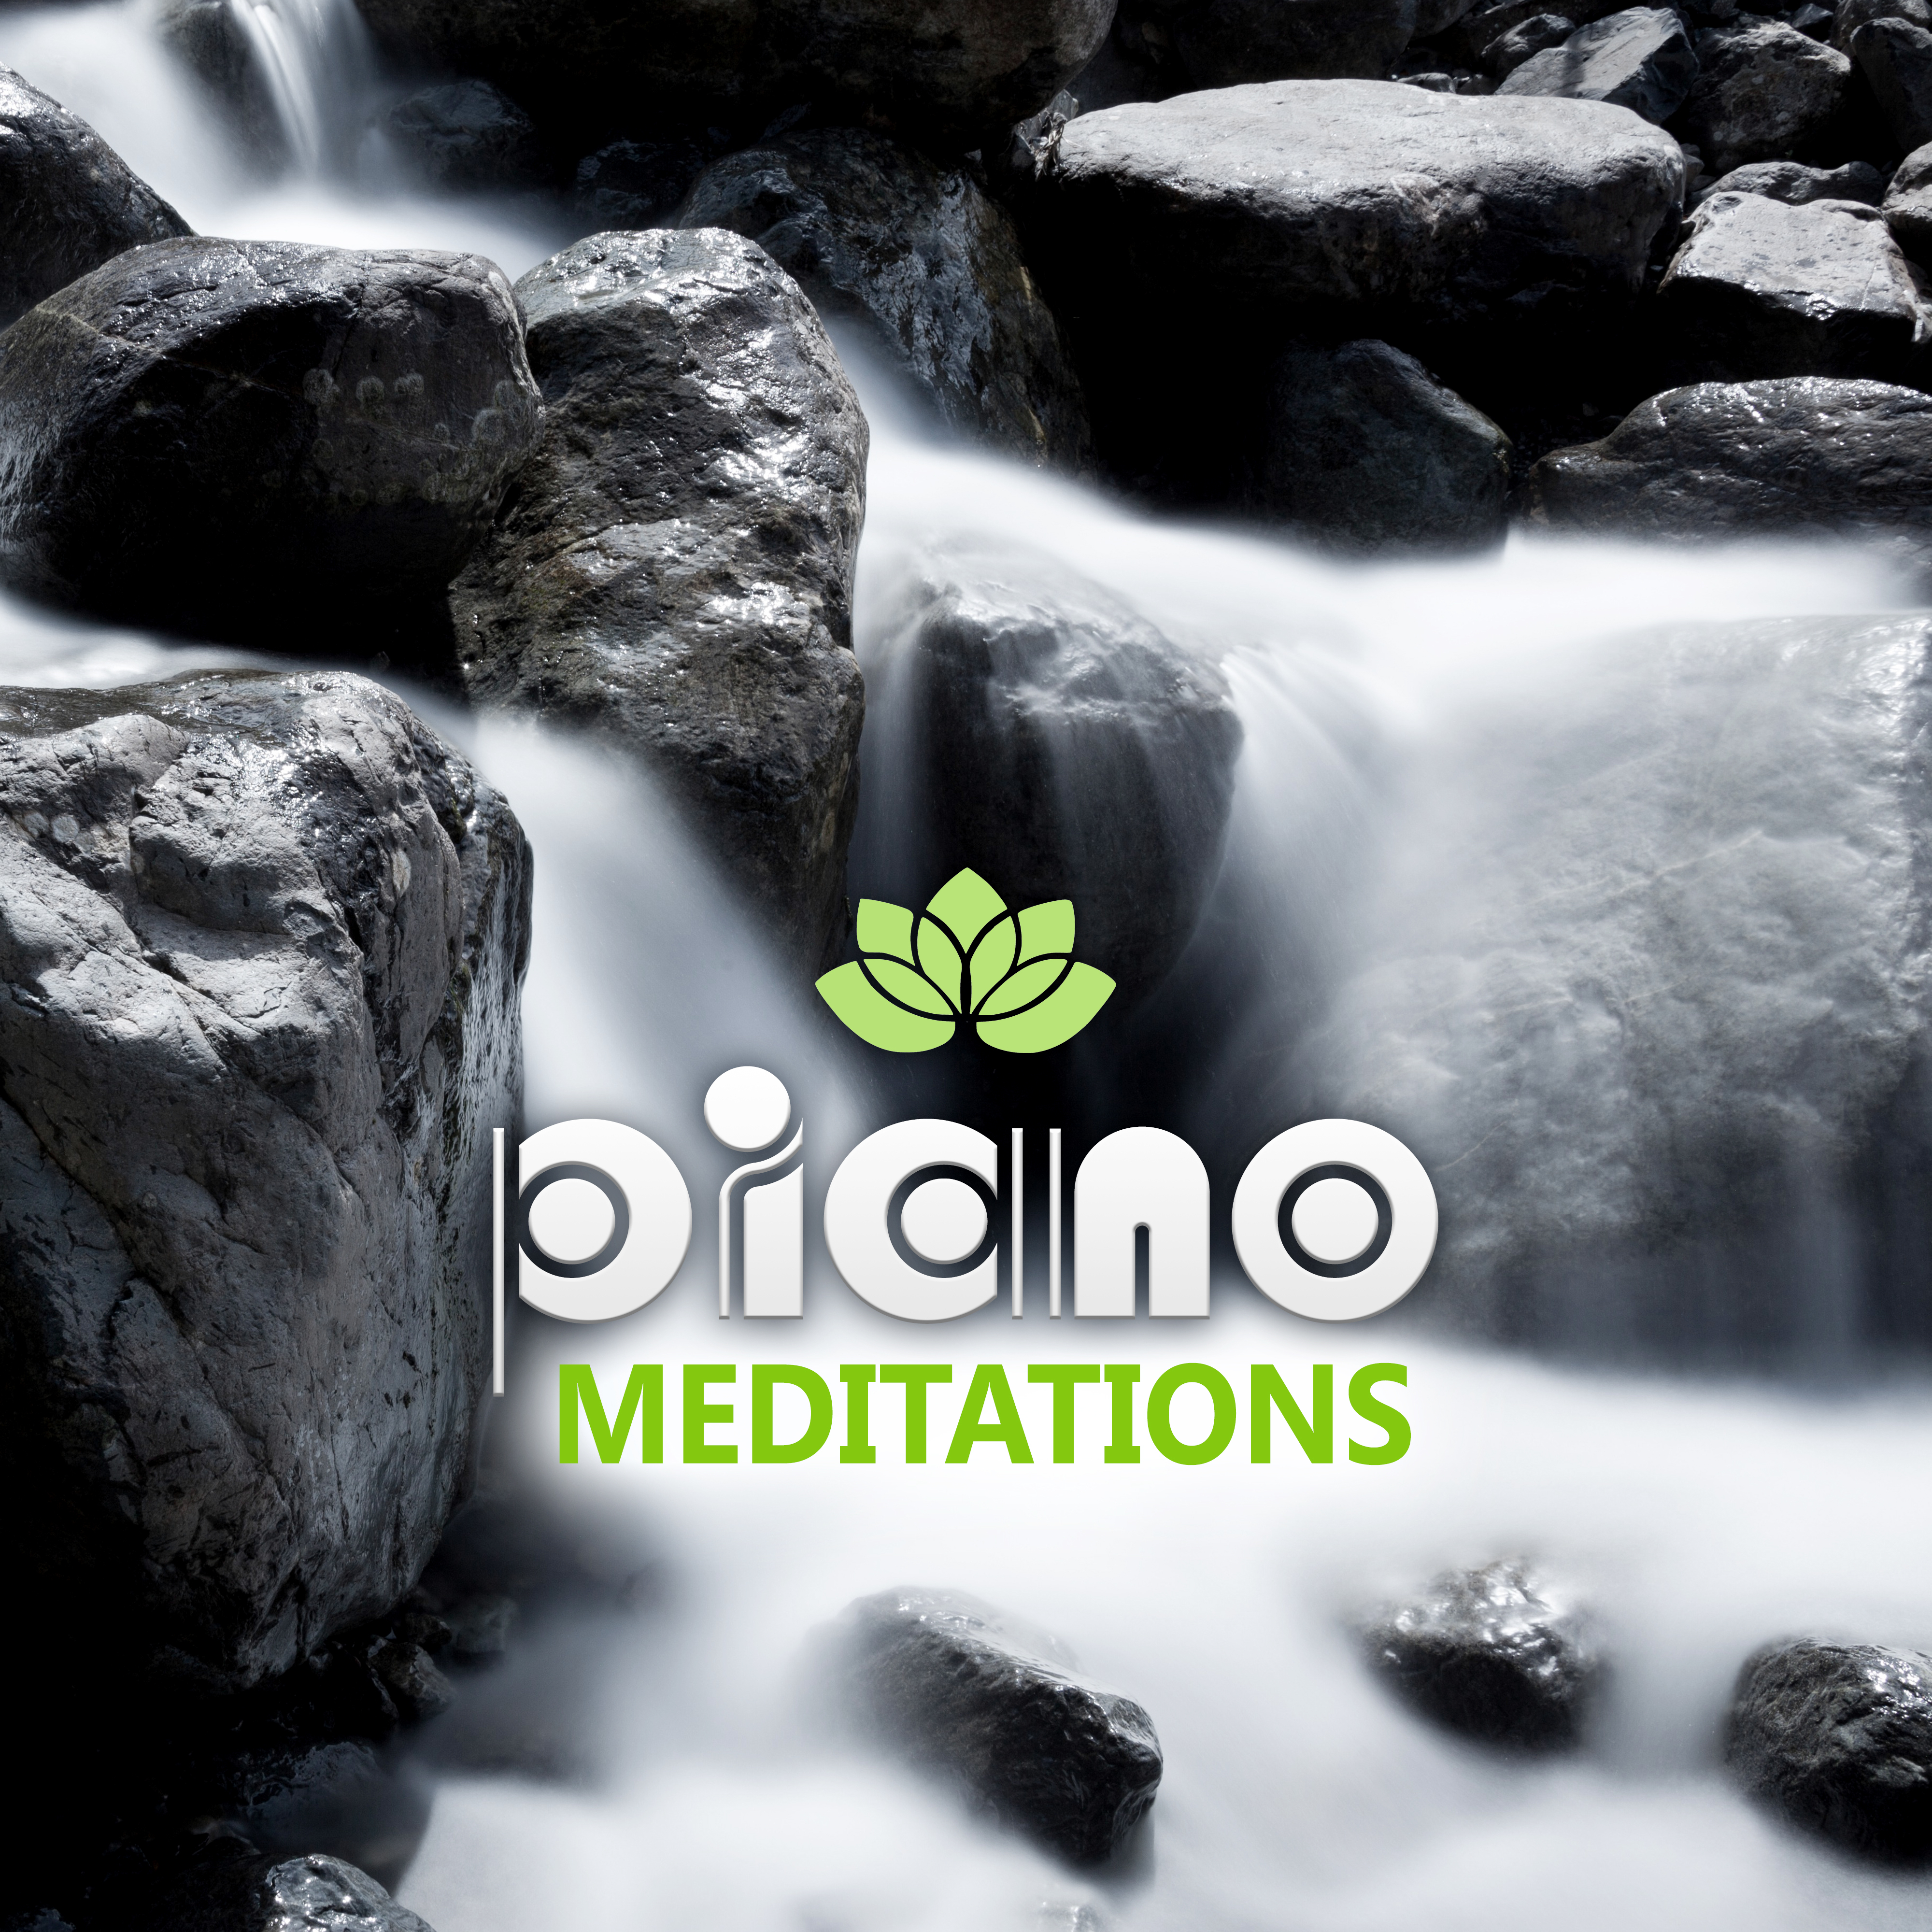 Piano Meditations  Ultimate Healing Piano Music for Meditation, Reiki, Relaxation, Mantras, Health, Body  Mind Harmony